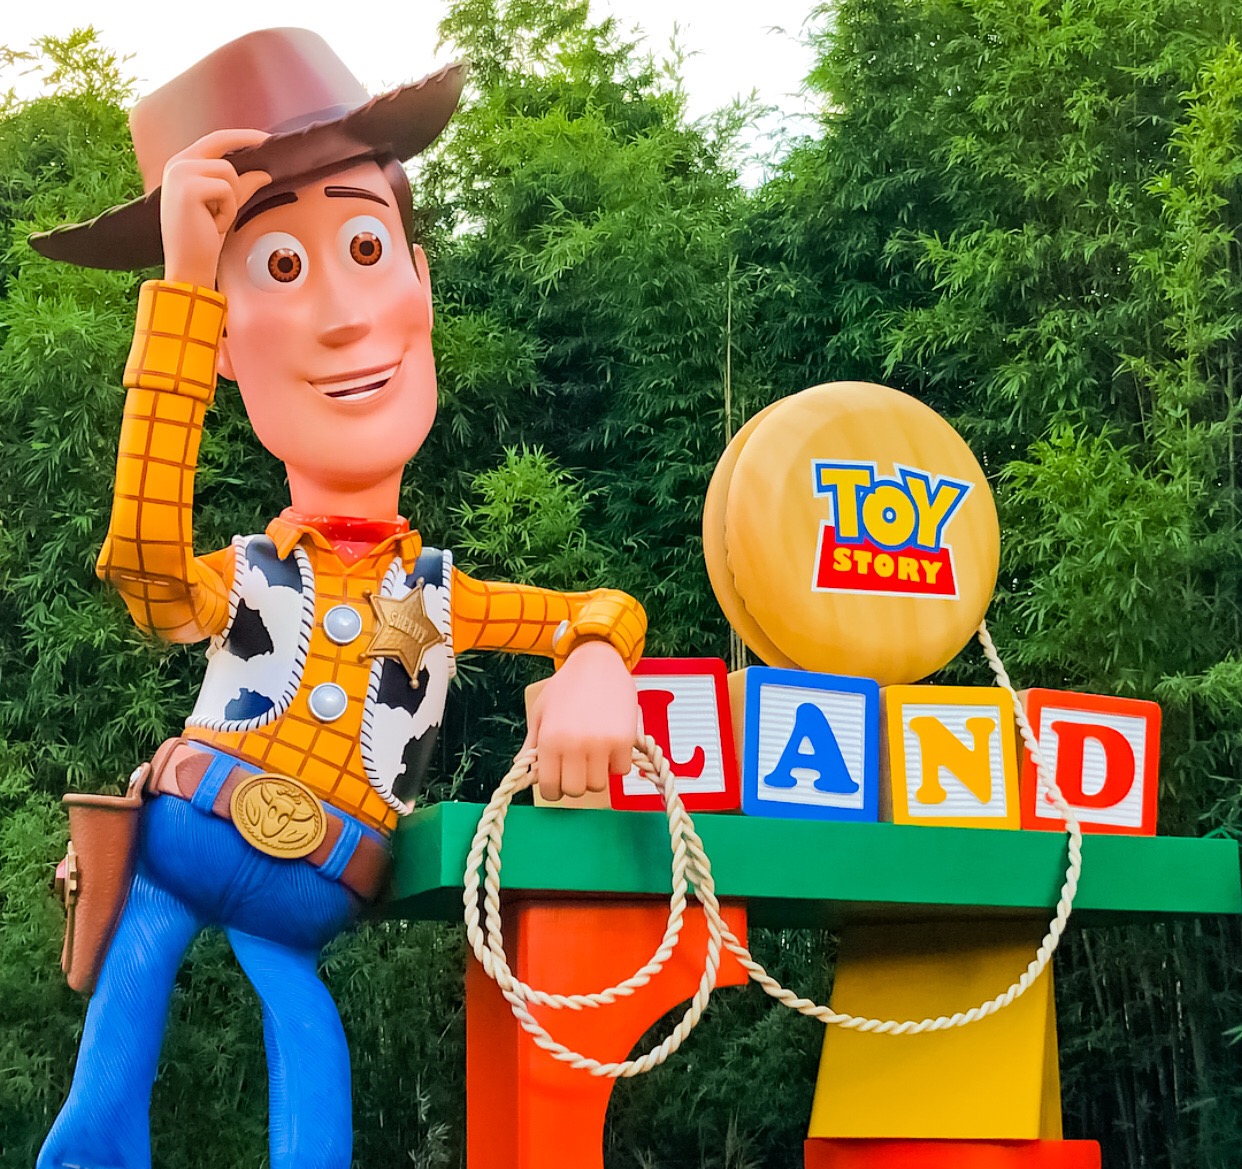 Guide to Disney World’s Toy Story Land at Hollywood Studios